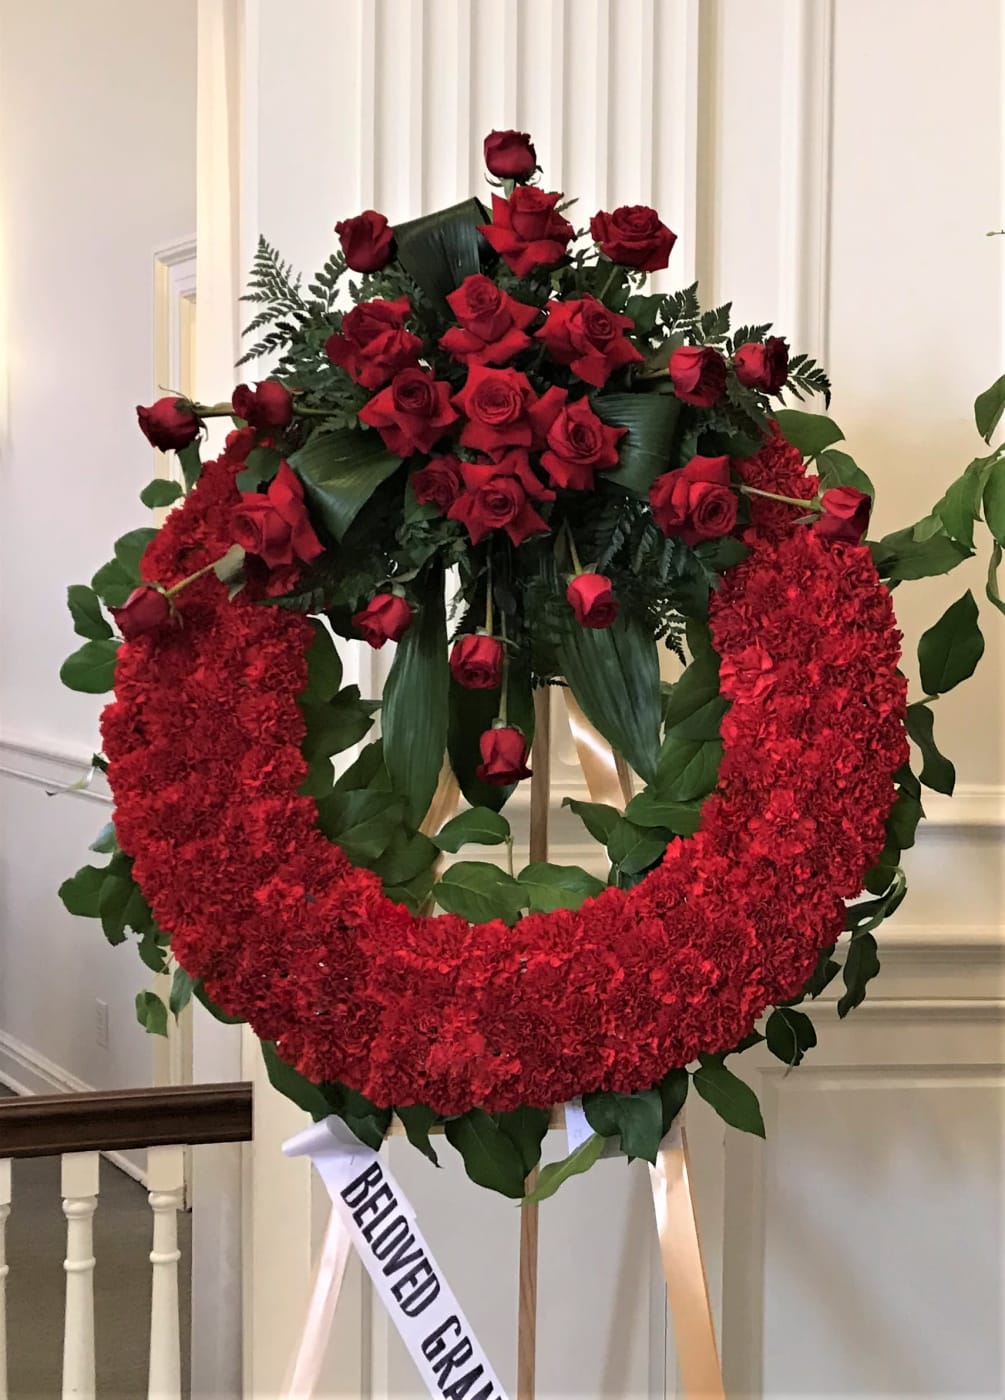 Designed with carnations and the arrangement includes roses and greenery. This standing